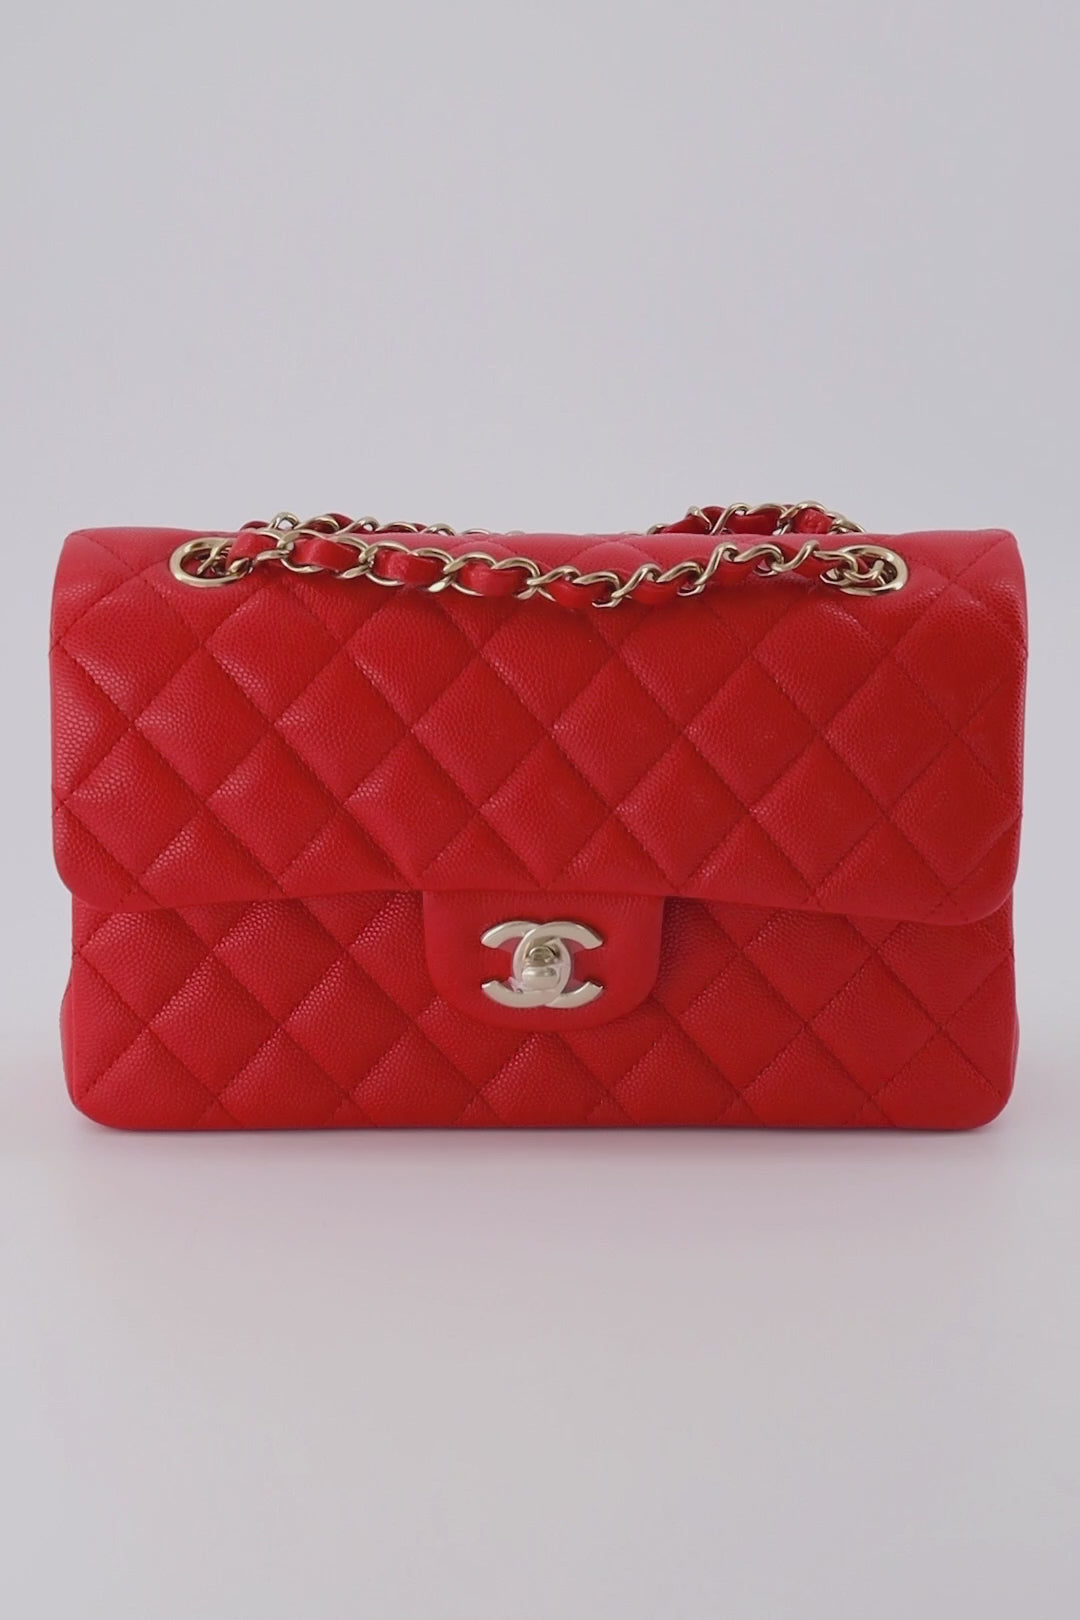 Chanel Classic Flap Small  19C Red Caviar Gold Hardware – loveholic